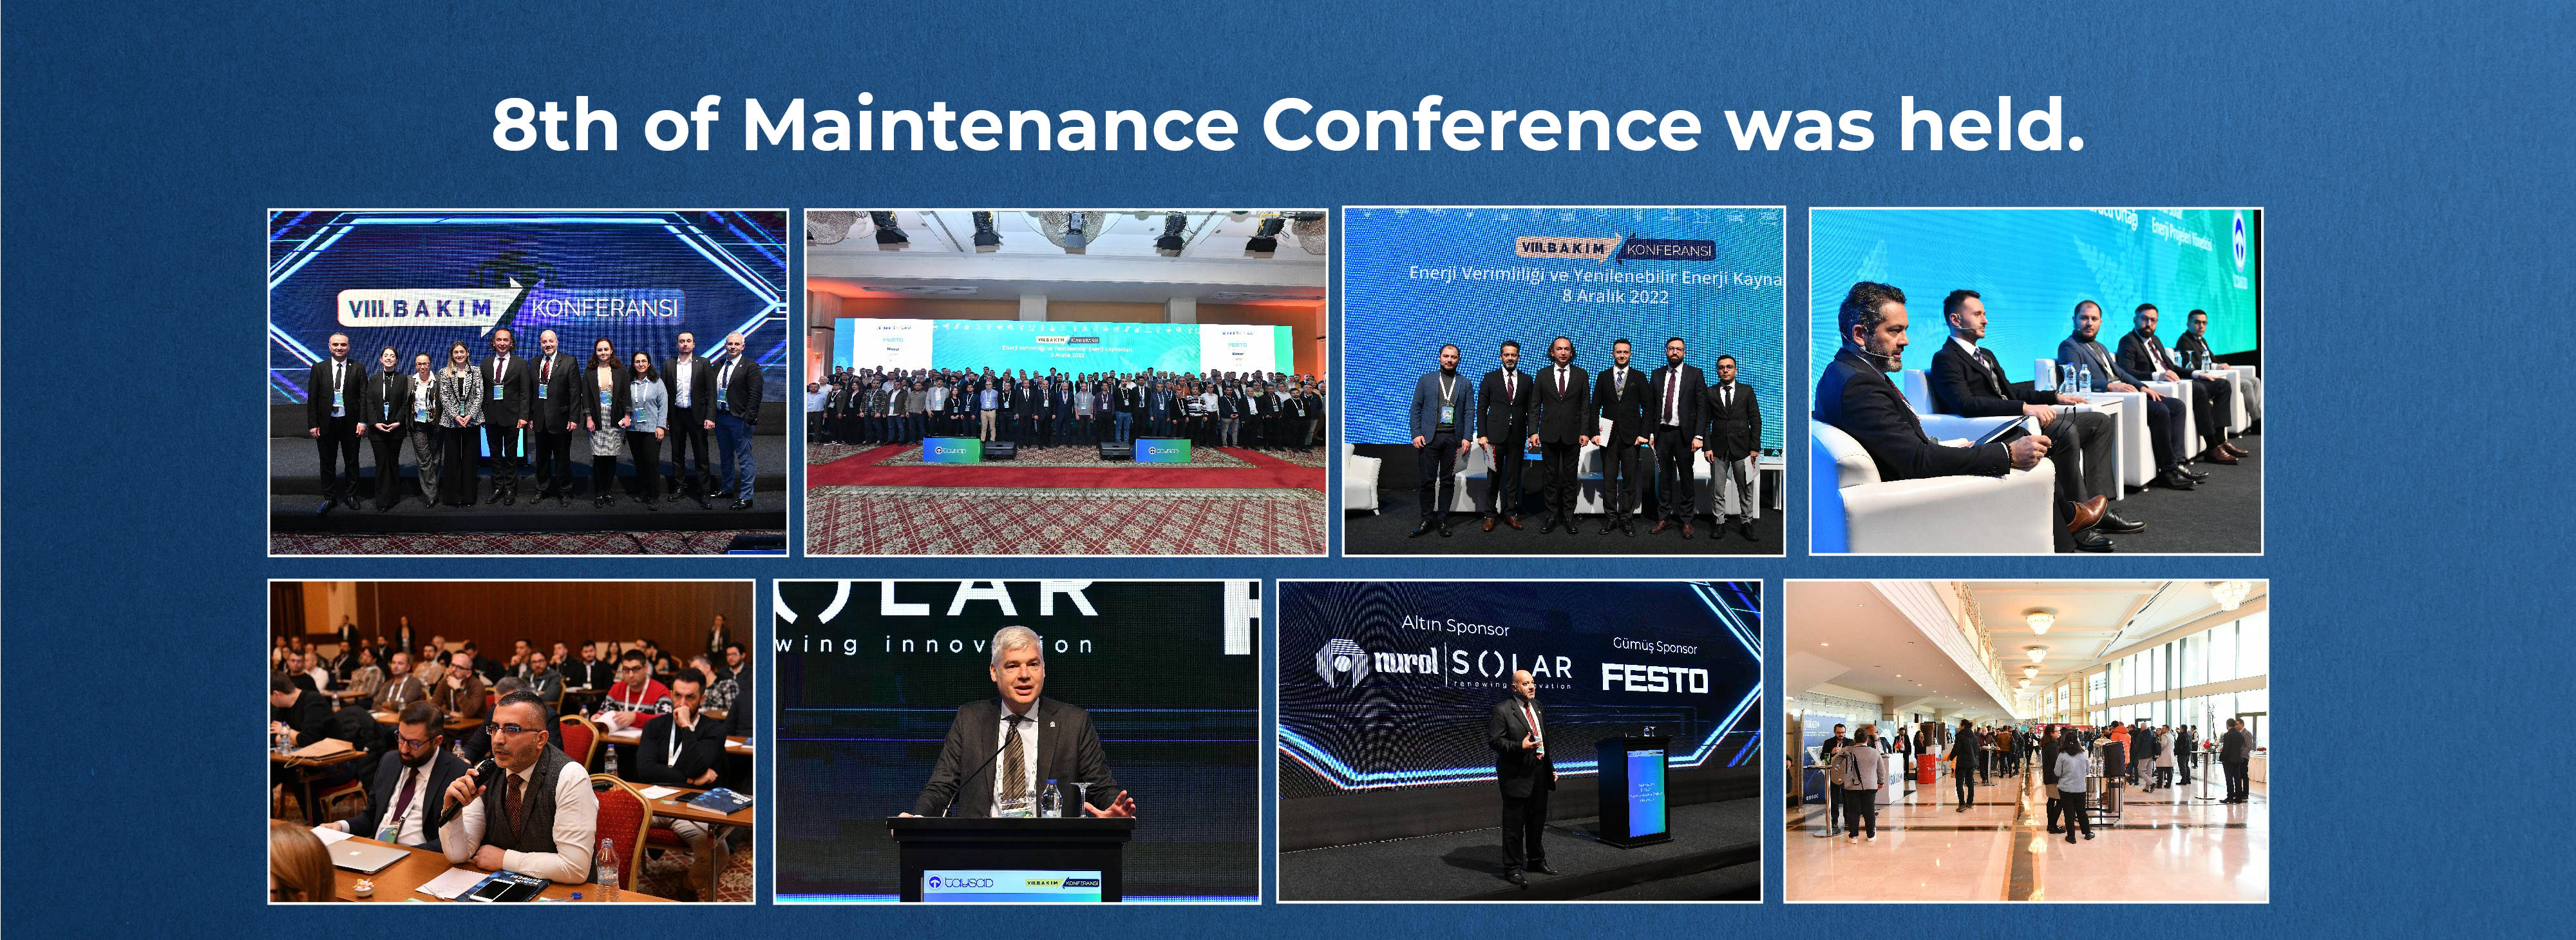 8th of Maintenance Conference was held.